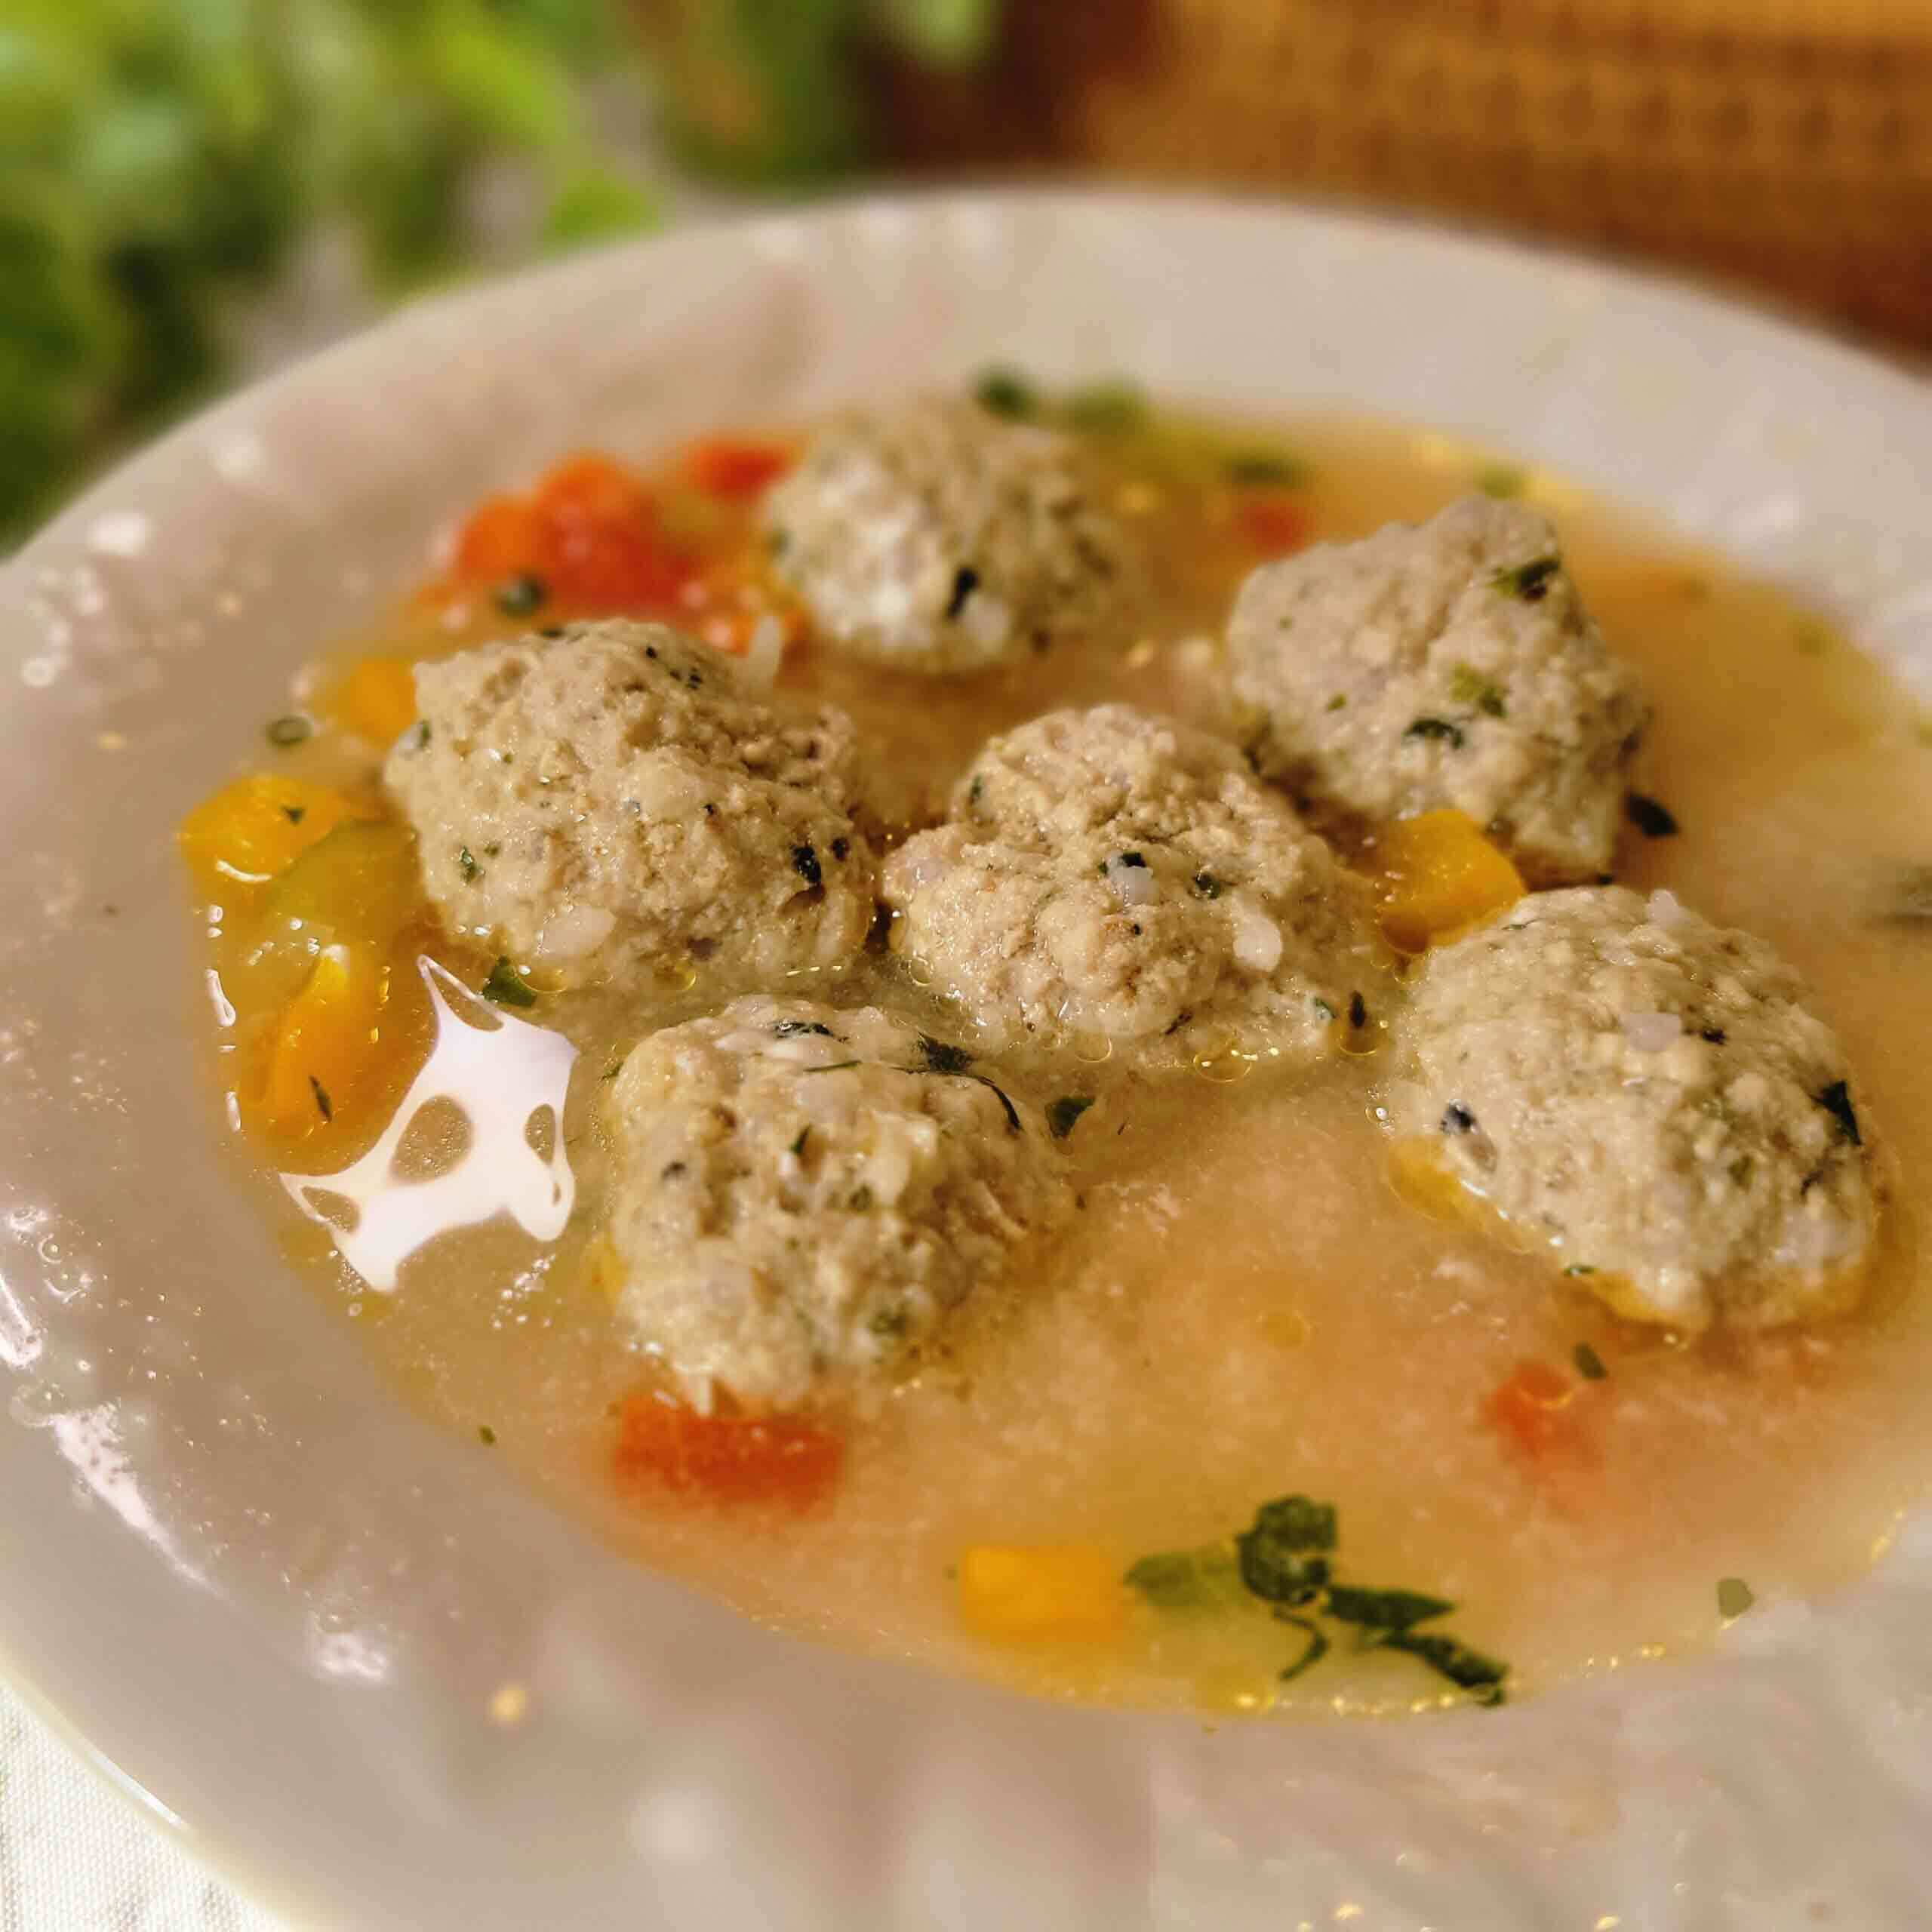 A food blog about Romanian Sour Soup With Meatballs, delicious Swedish meatballs mixed with a warm, light broth.